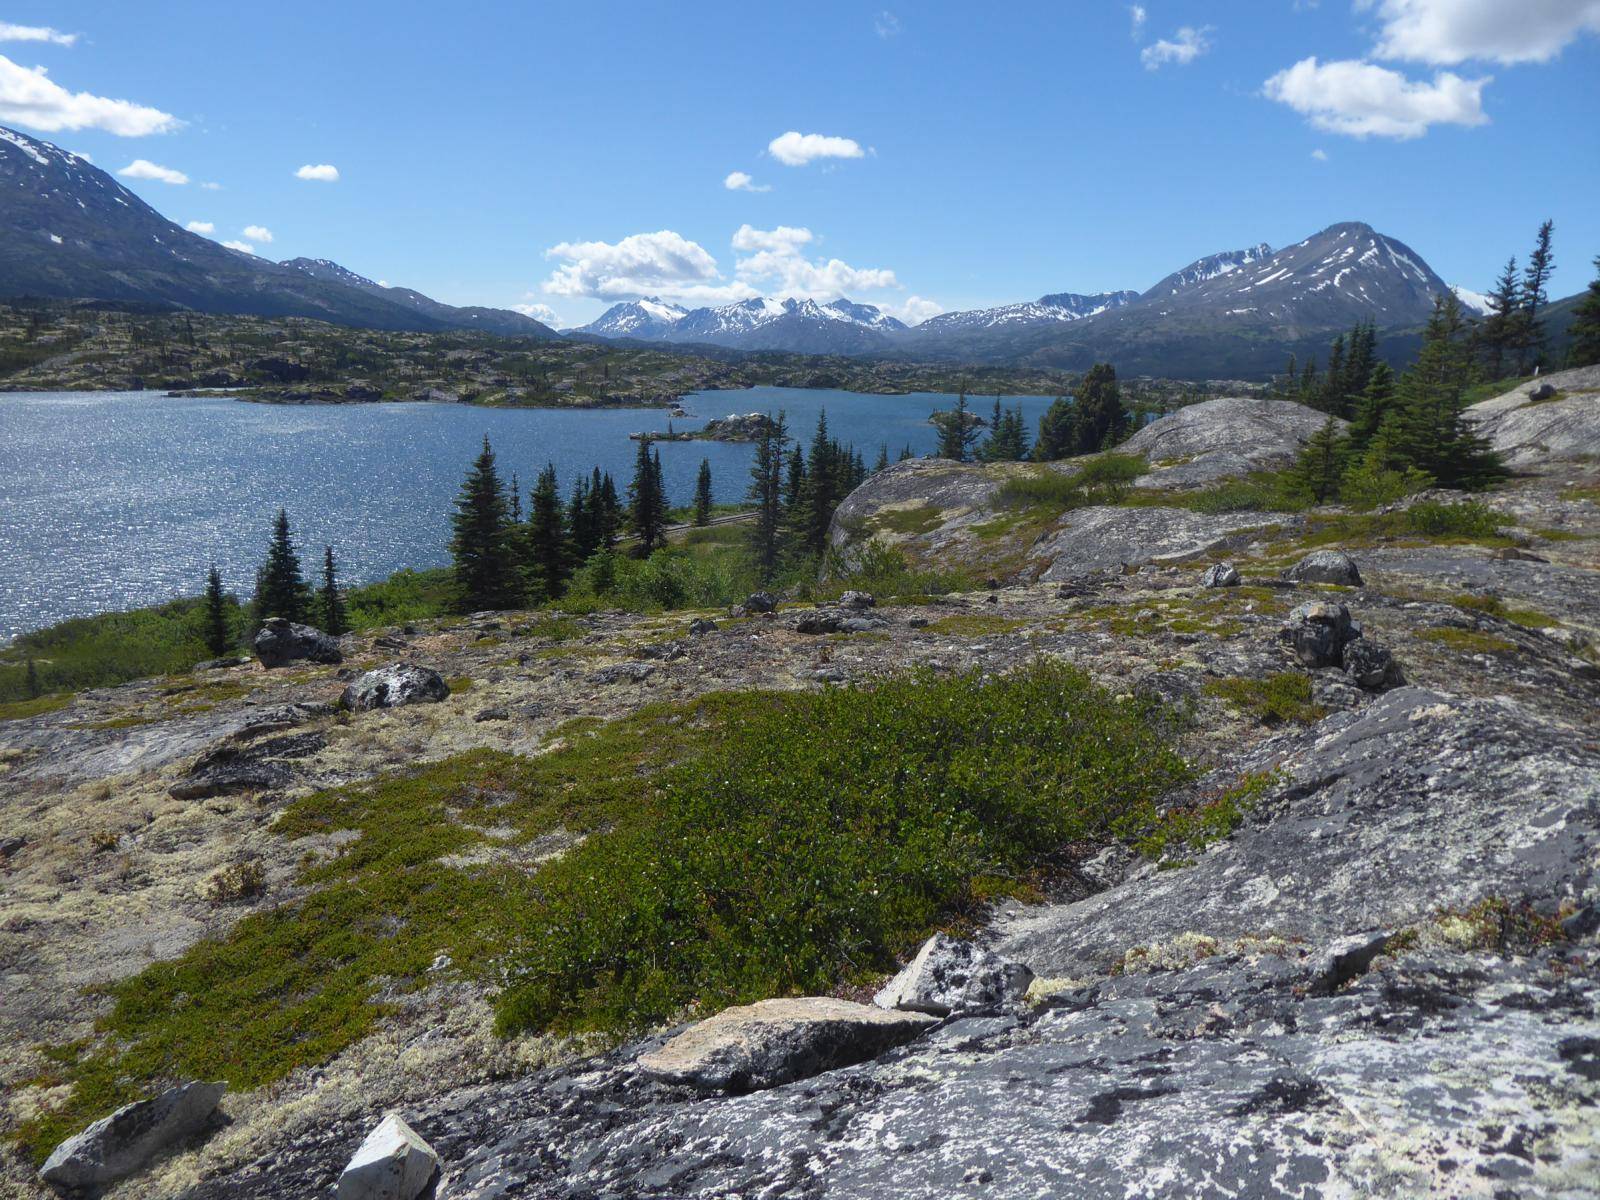 Rocky terrain and the view on a lake on the road to skagway